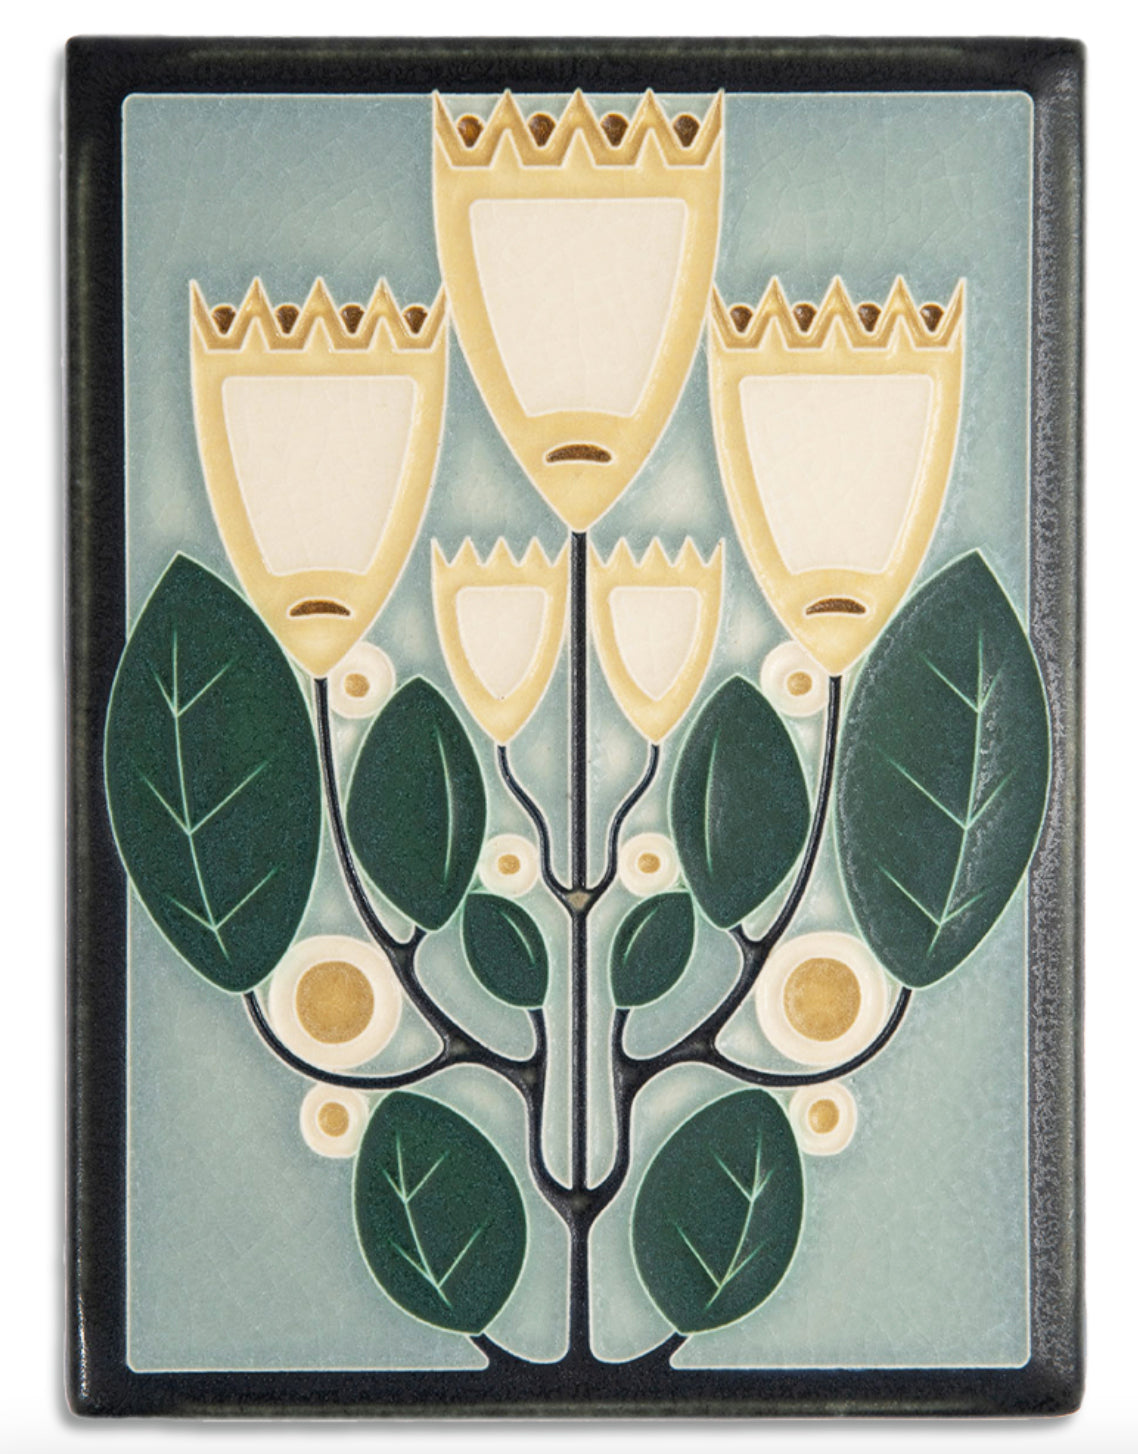 This Jugendstil design is based on one of a series of stylized flowers by Gustav Marisch, published by the Wiener Werkstätte circa 1912. Crown Quintet joins another Motawi art tile from that Marisch series: Blooming Bells.